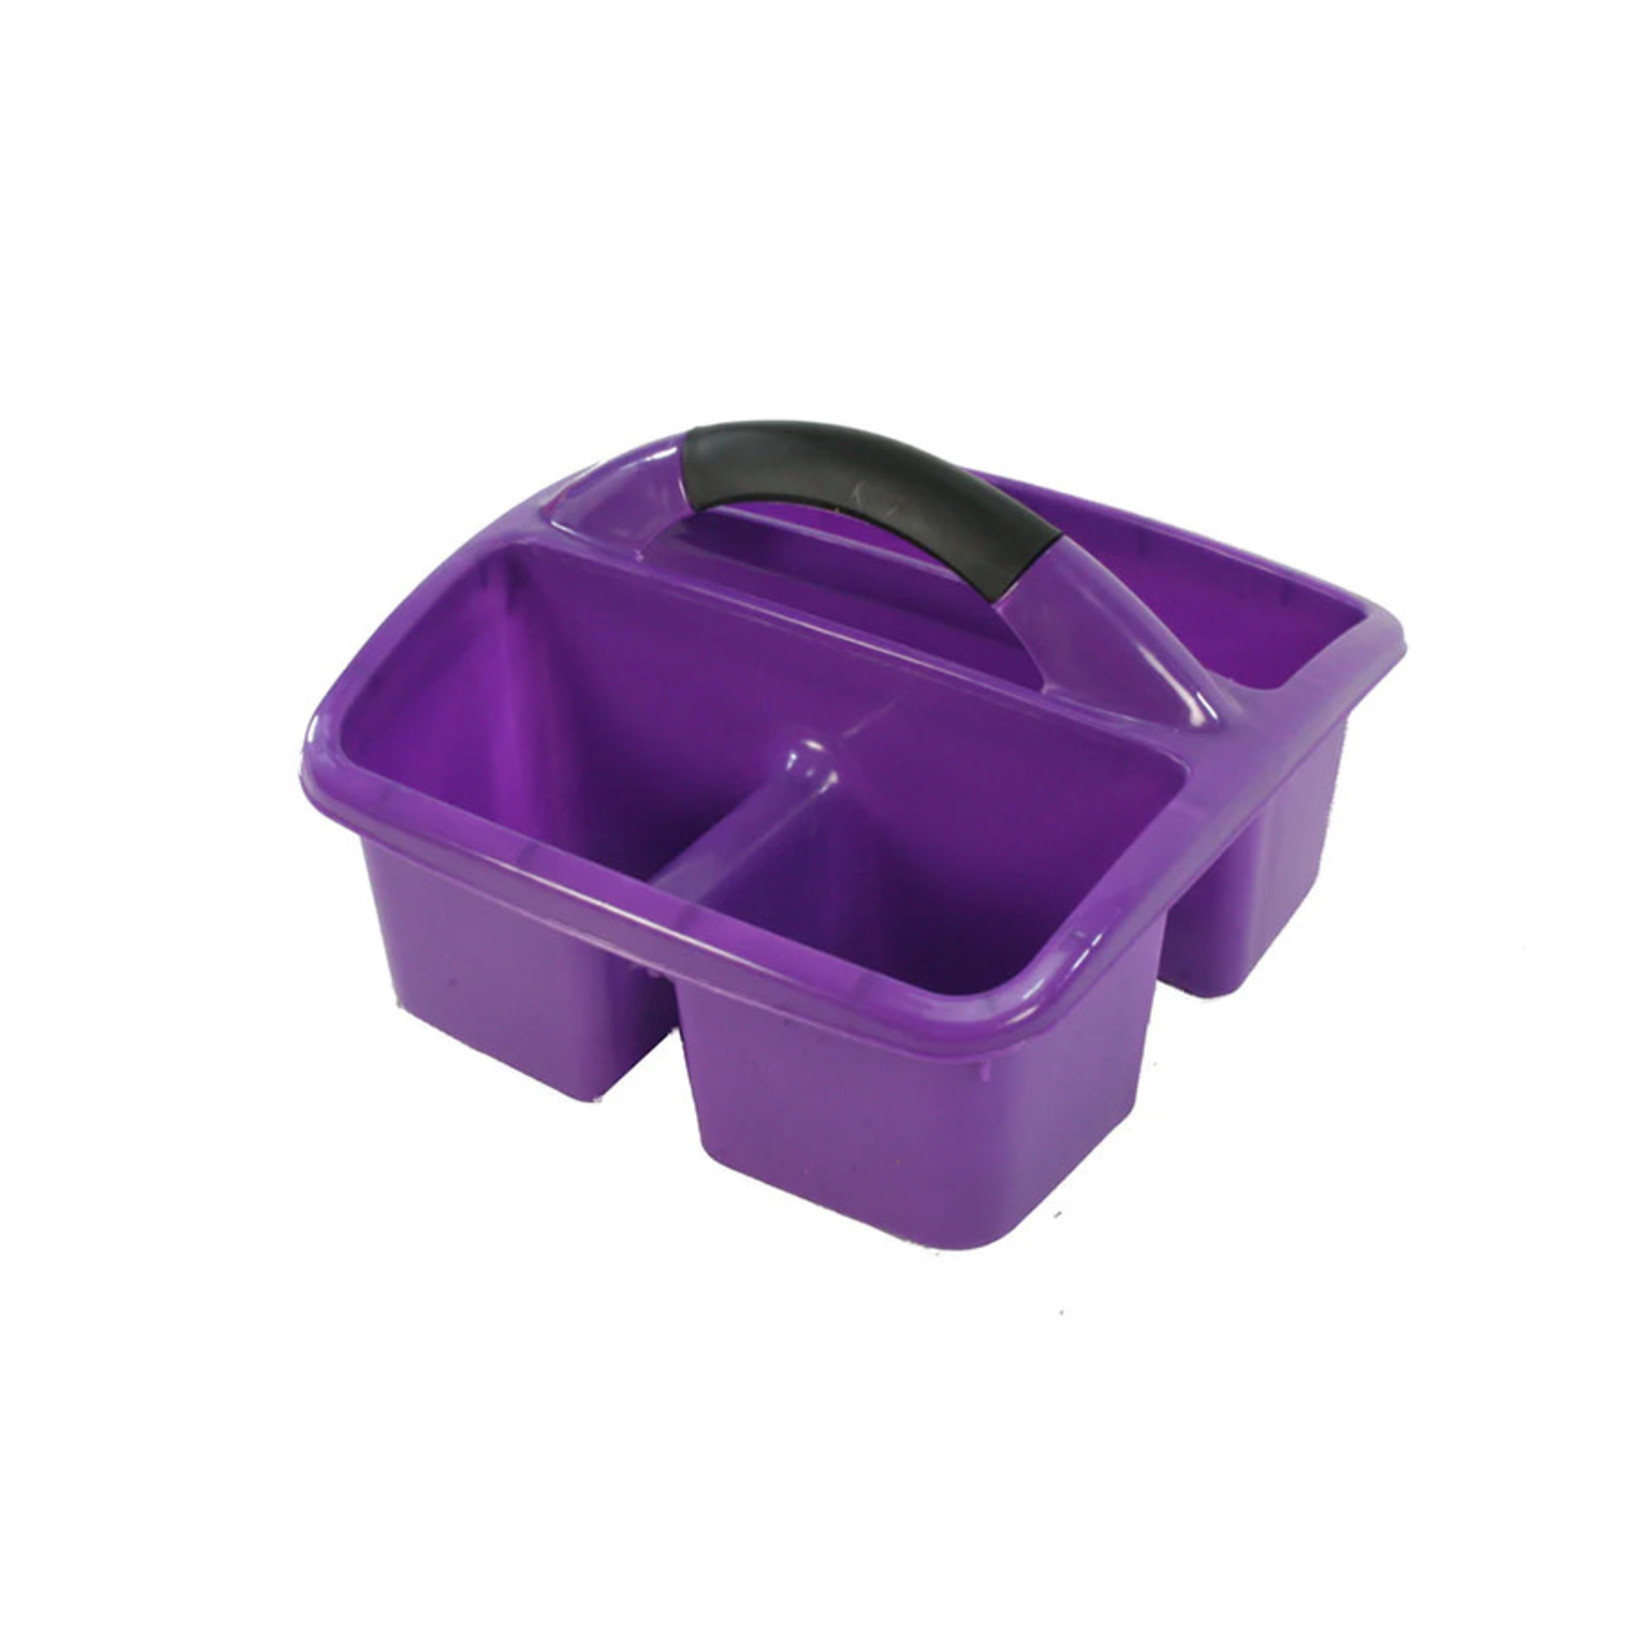 Centurion Supply Deluxe Small Caddy